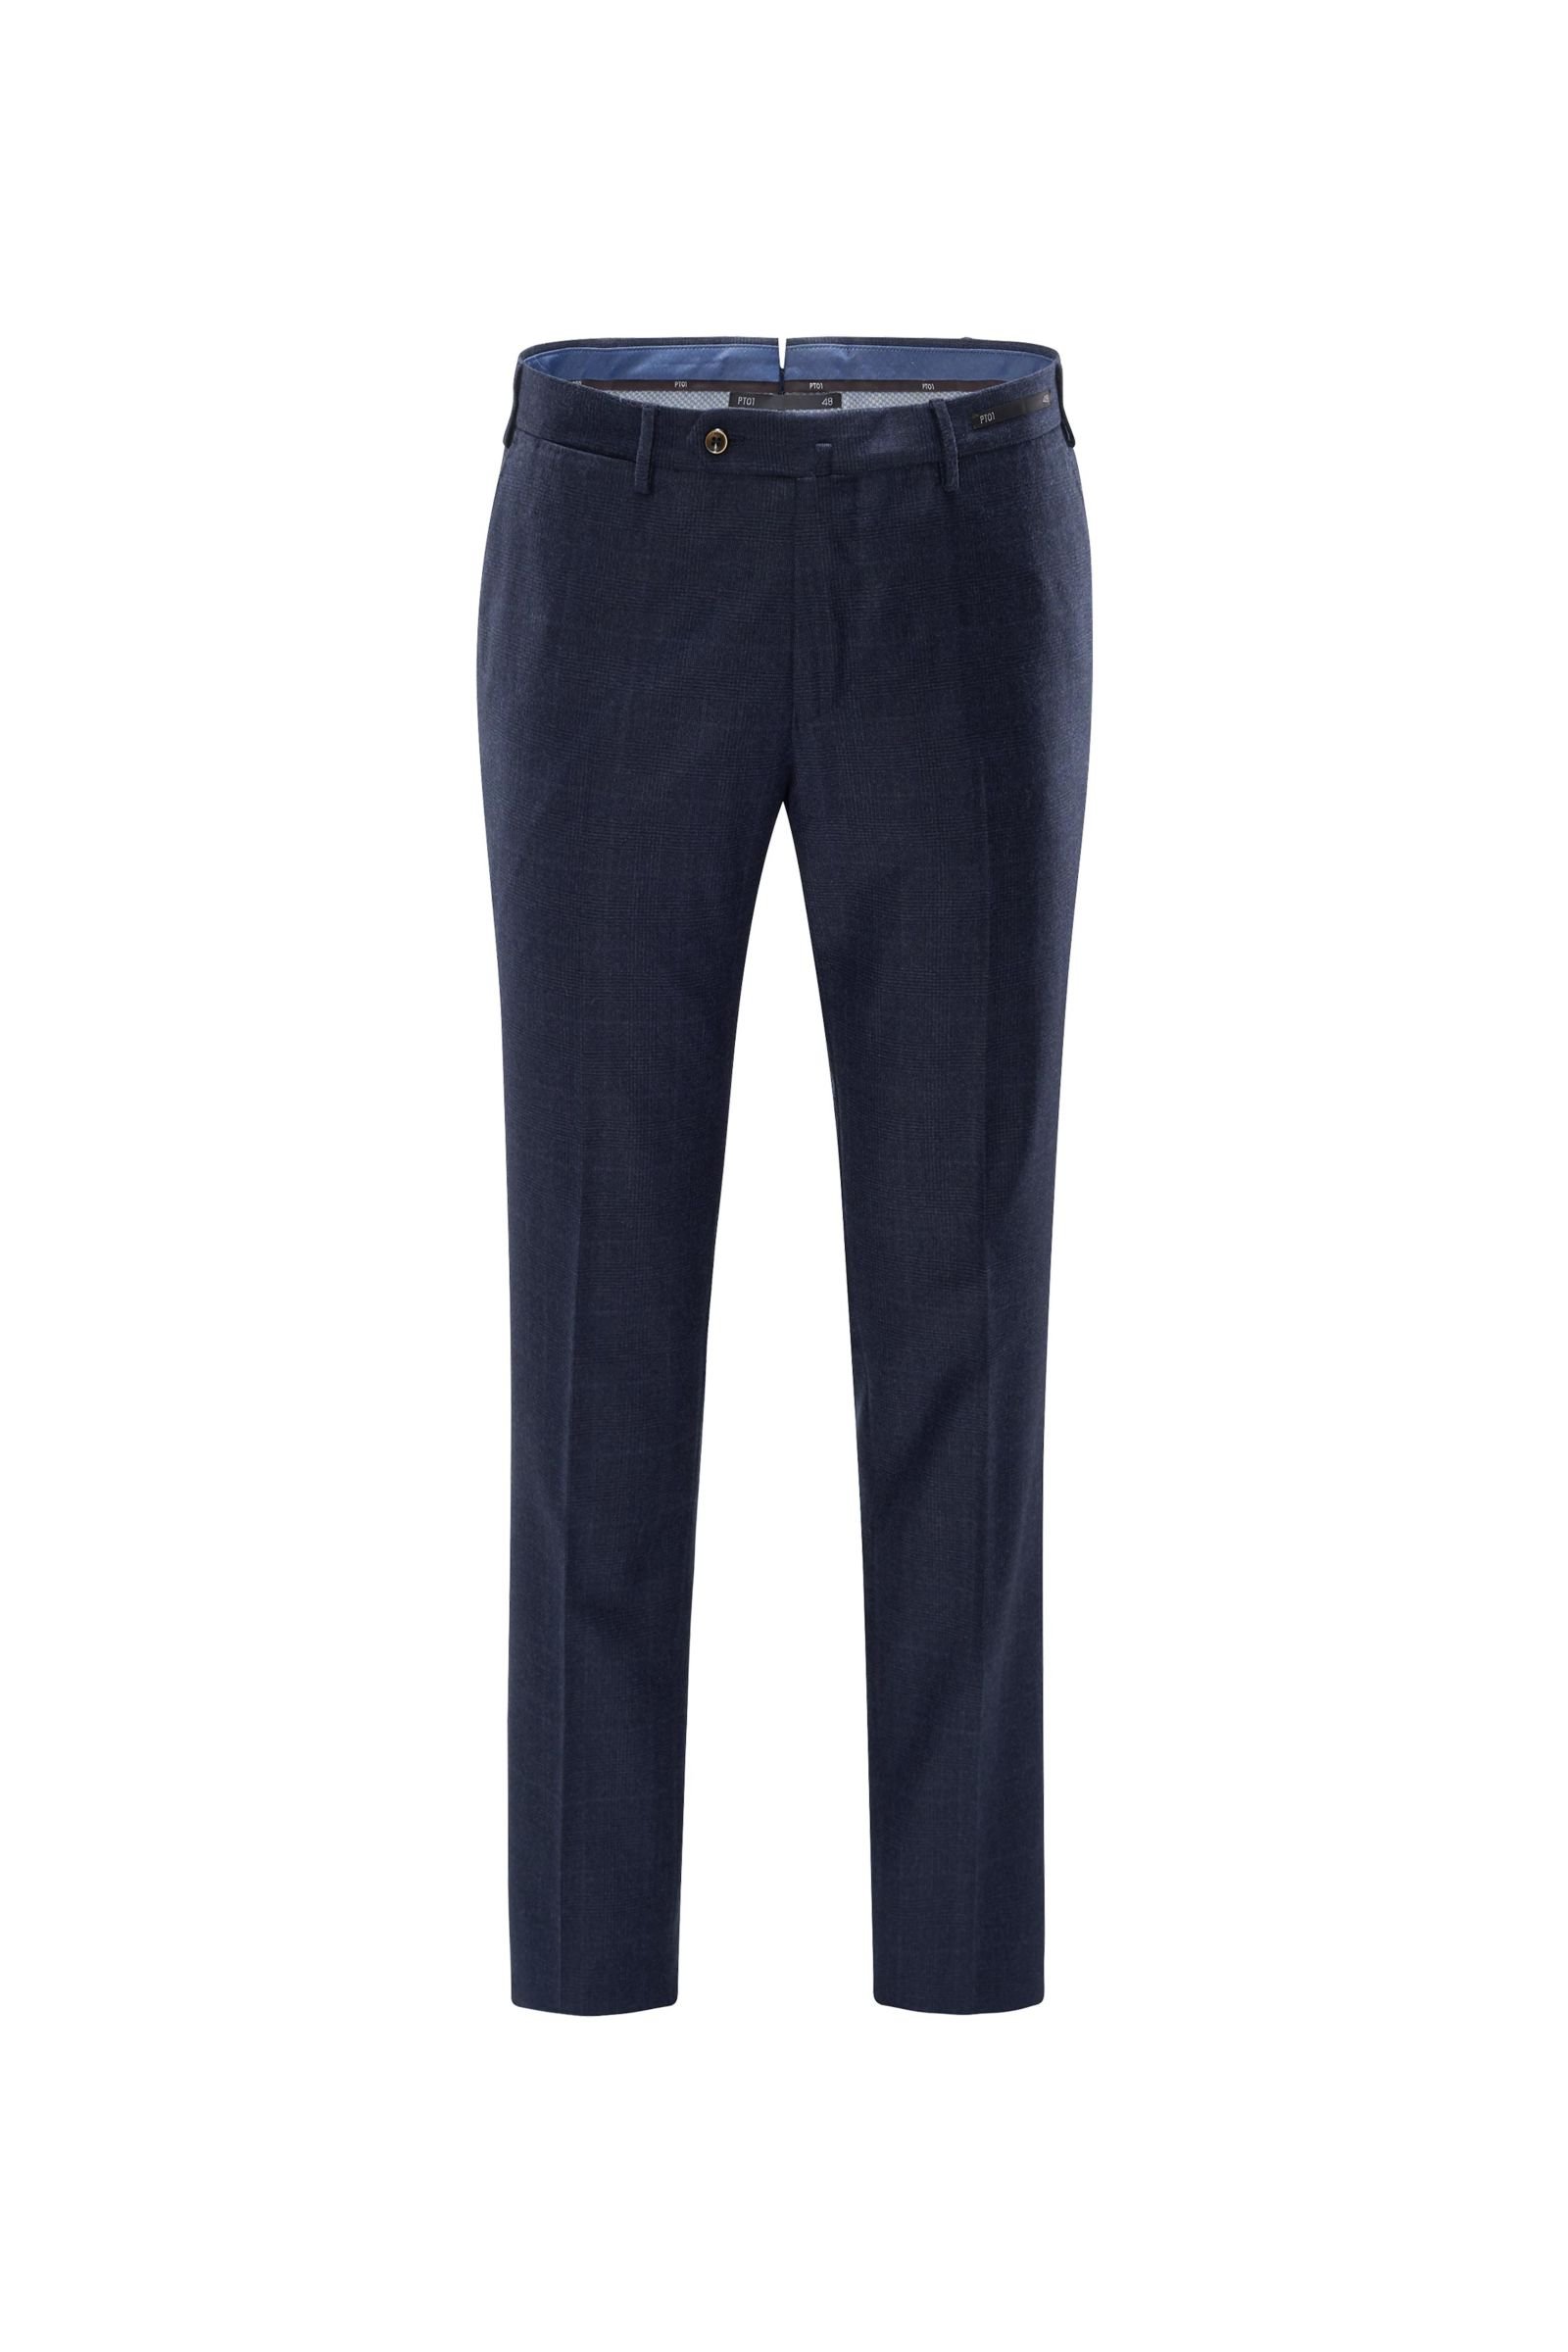 Wool trousers 'Slim Fit' navy checked